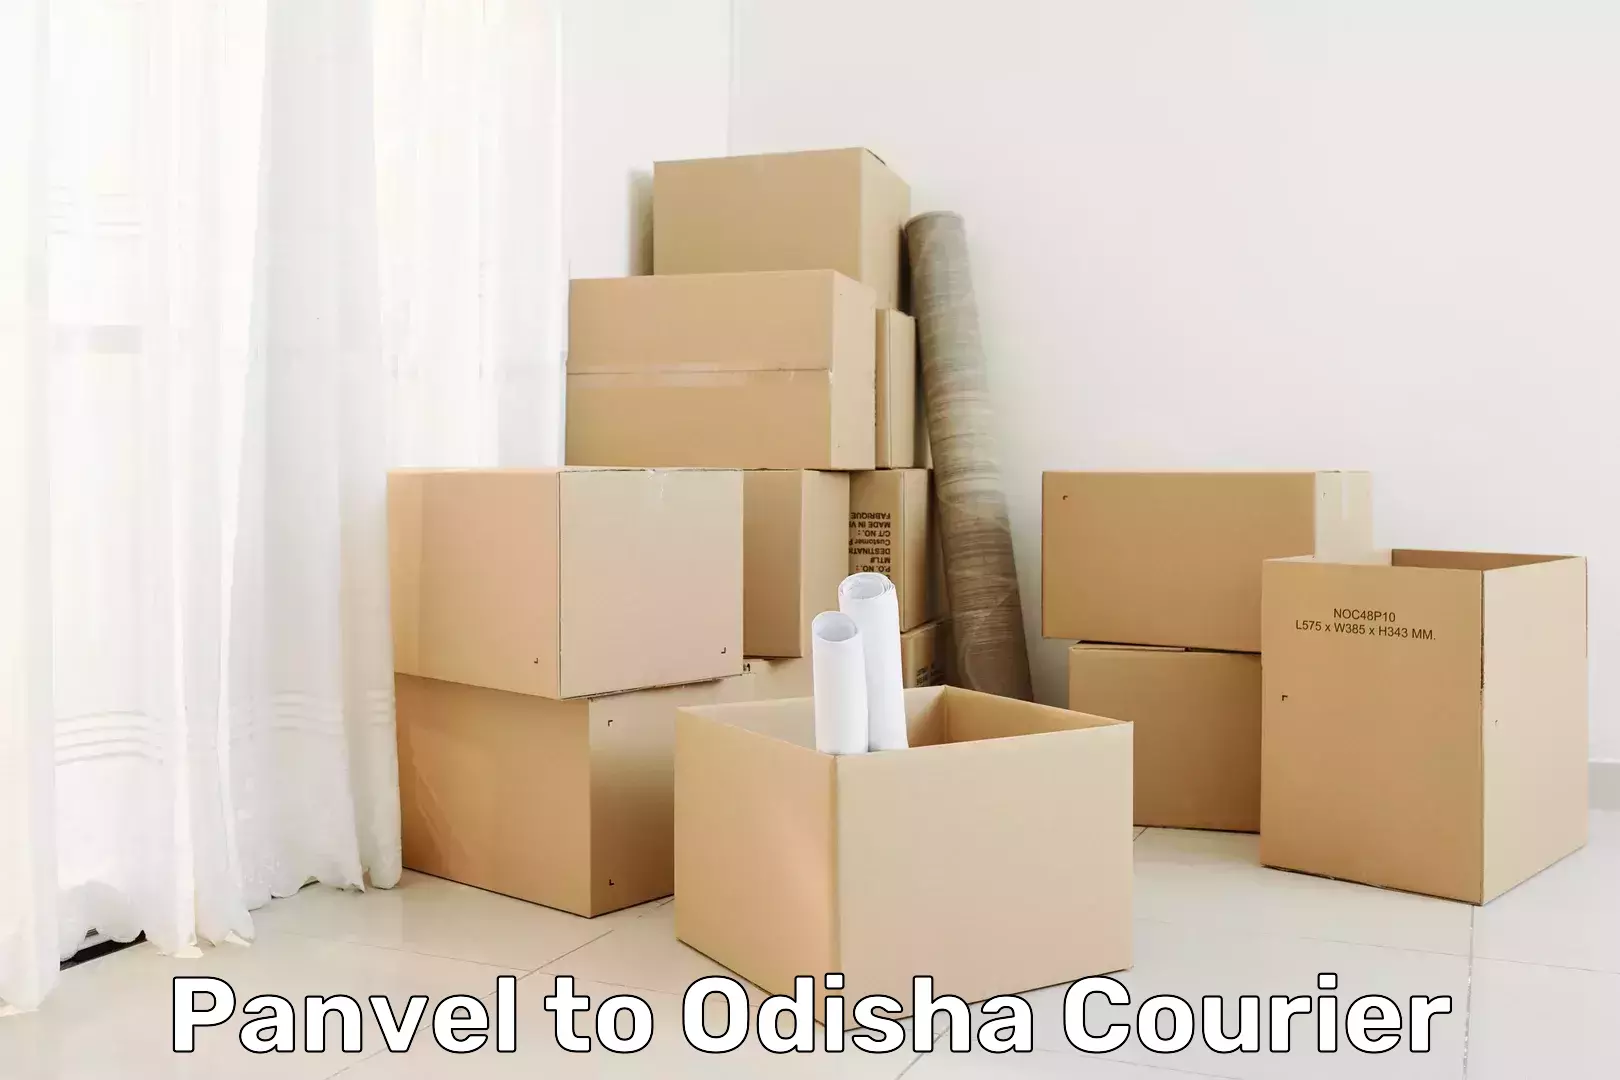 High-capacity parcel service Panvel to Pipili